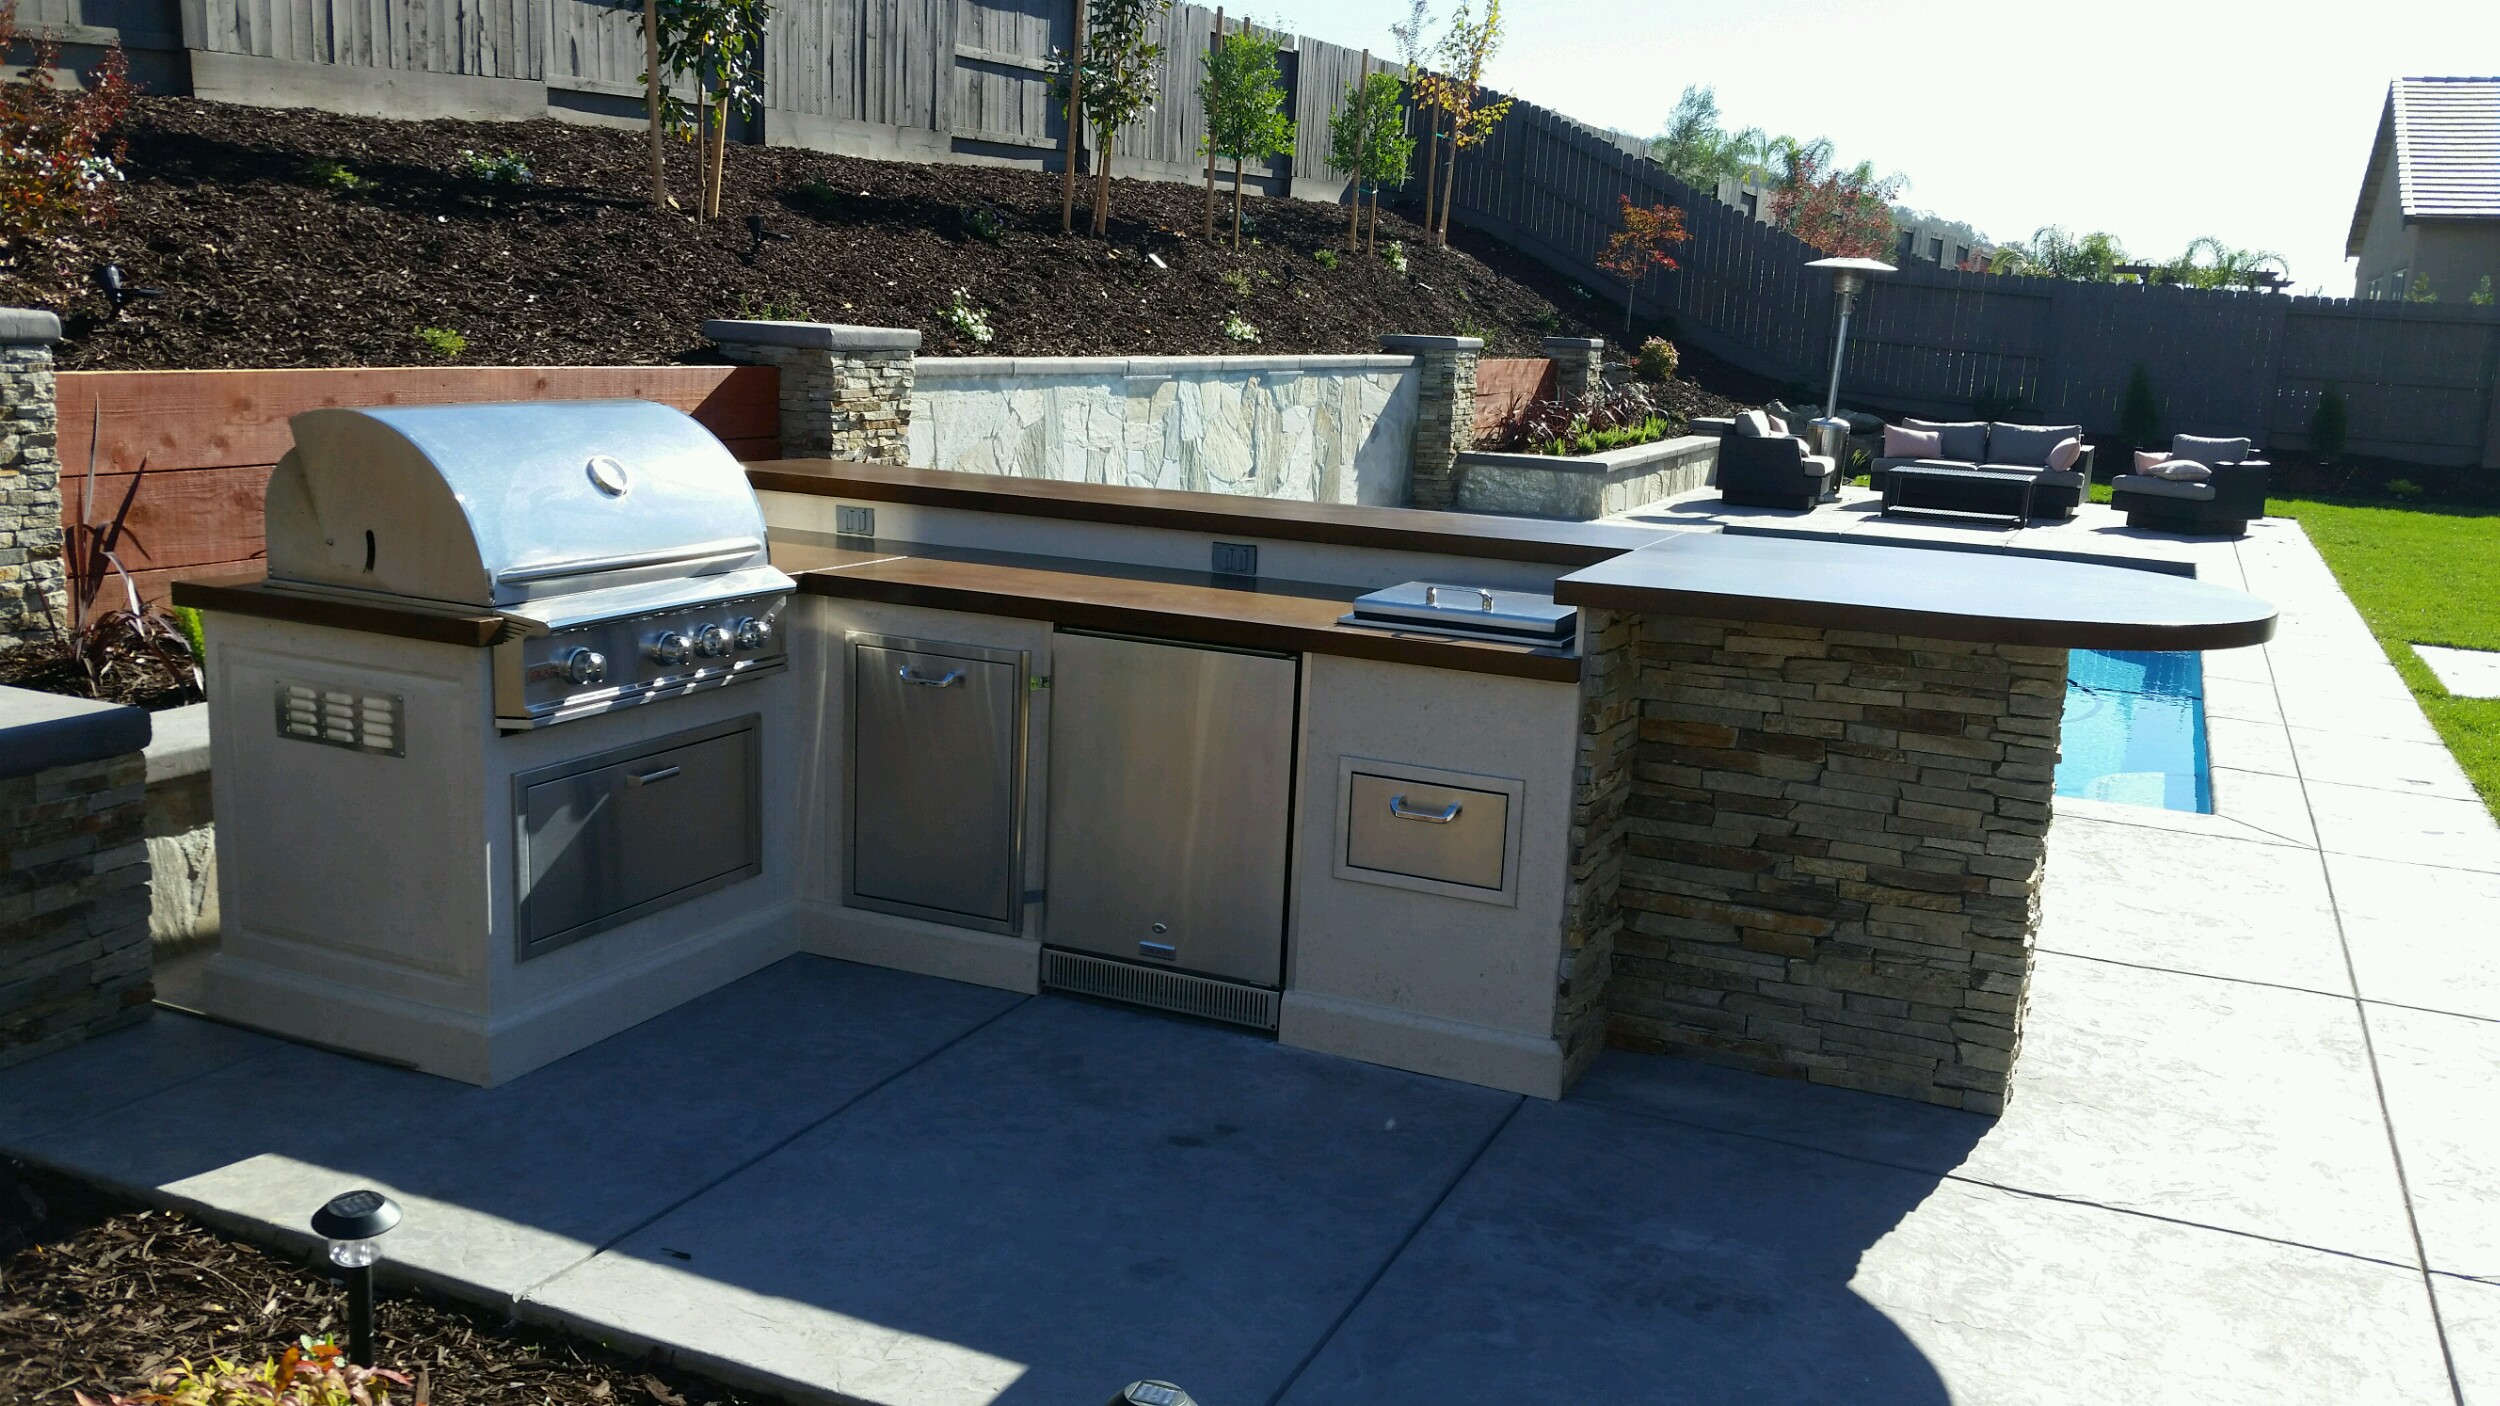 A patio heated up by an outdoor fire pit designed by Pacific Hearth & Home, Inc. in Rancho Cordova, CA